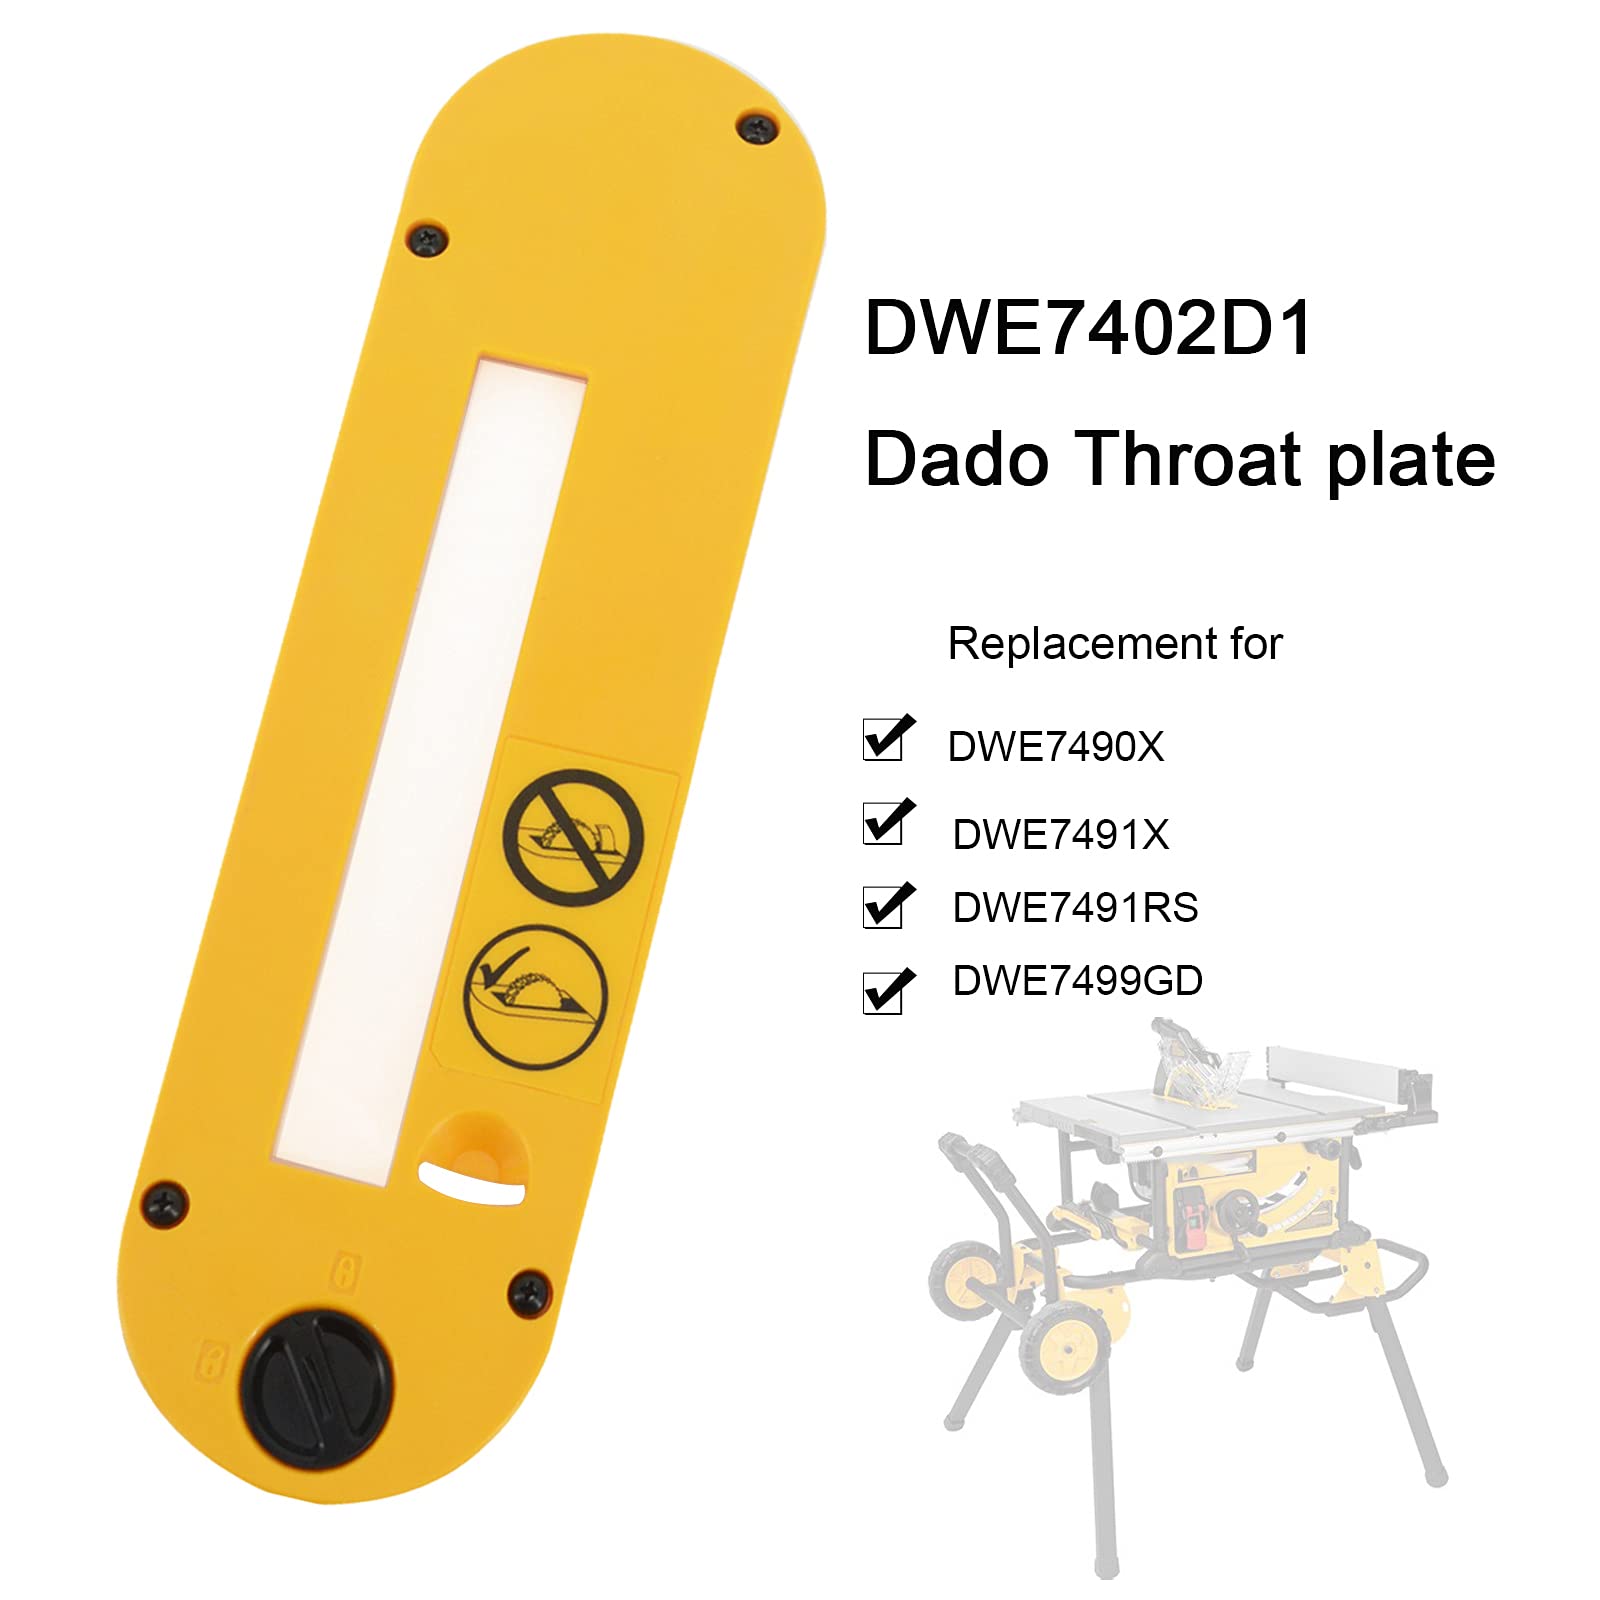 Dado Throat Plate, Table Saw Parts Insert Accessories Replacement for 10-Inch Portable Table Saw DEWALT DWE7490, DWE7491 Versiones